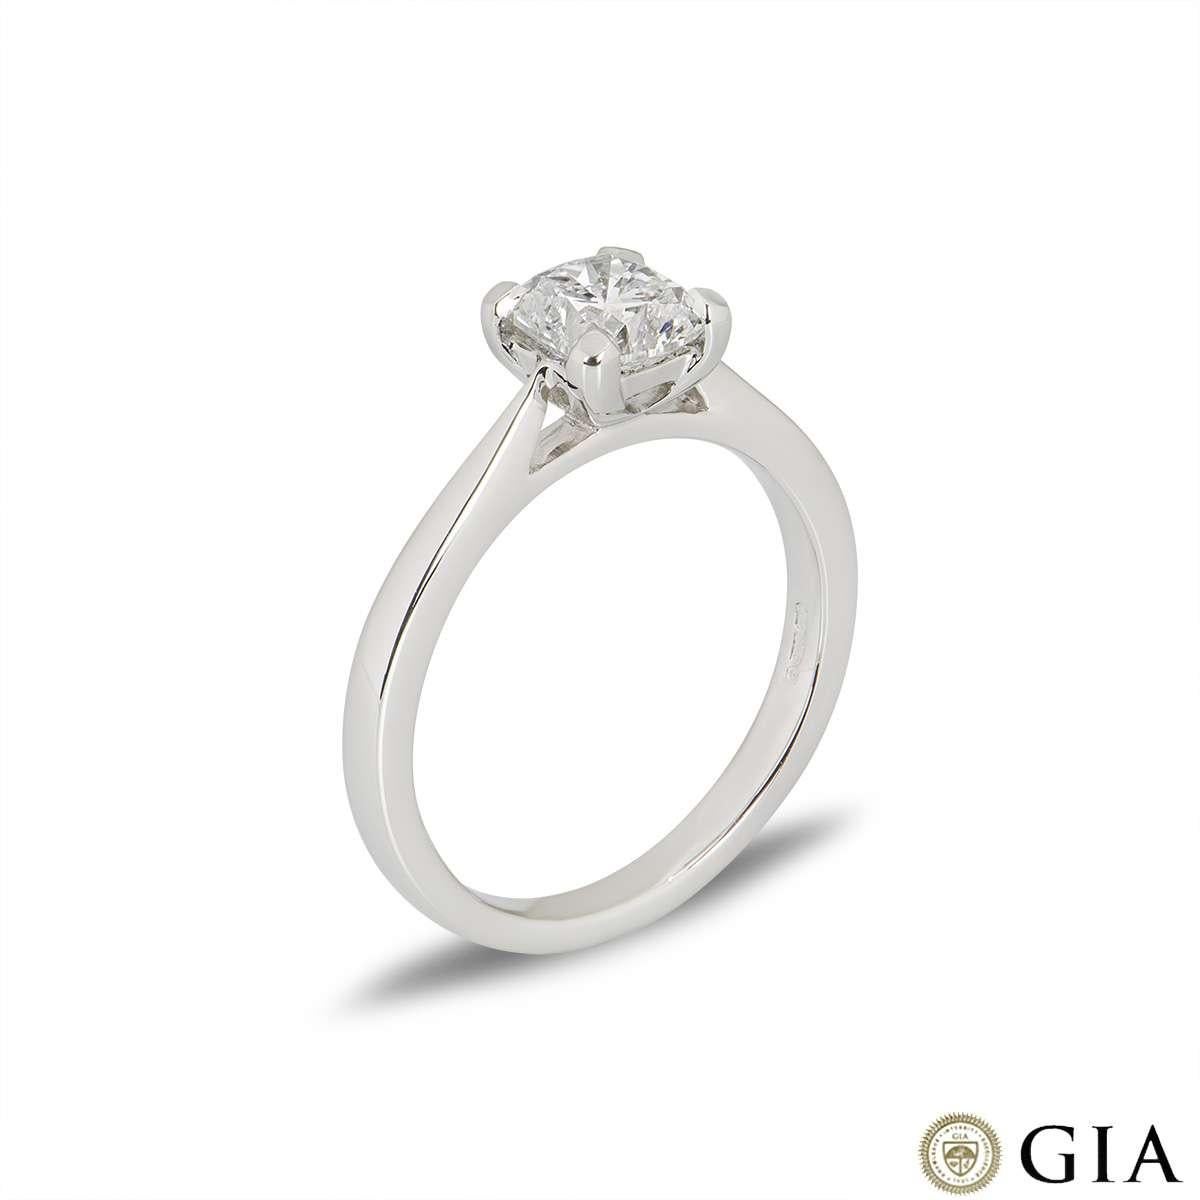 A stunning platinum cushion cut diamond engagement ring. The ring comprises of a cushion cut diamond in a four claw setting with a weight of 1.01ct, E colour and VS2 clarity. The ring is currently a size UK M - EU 52 - US 6 but can be adjusted for a